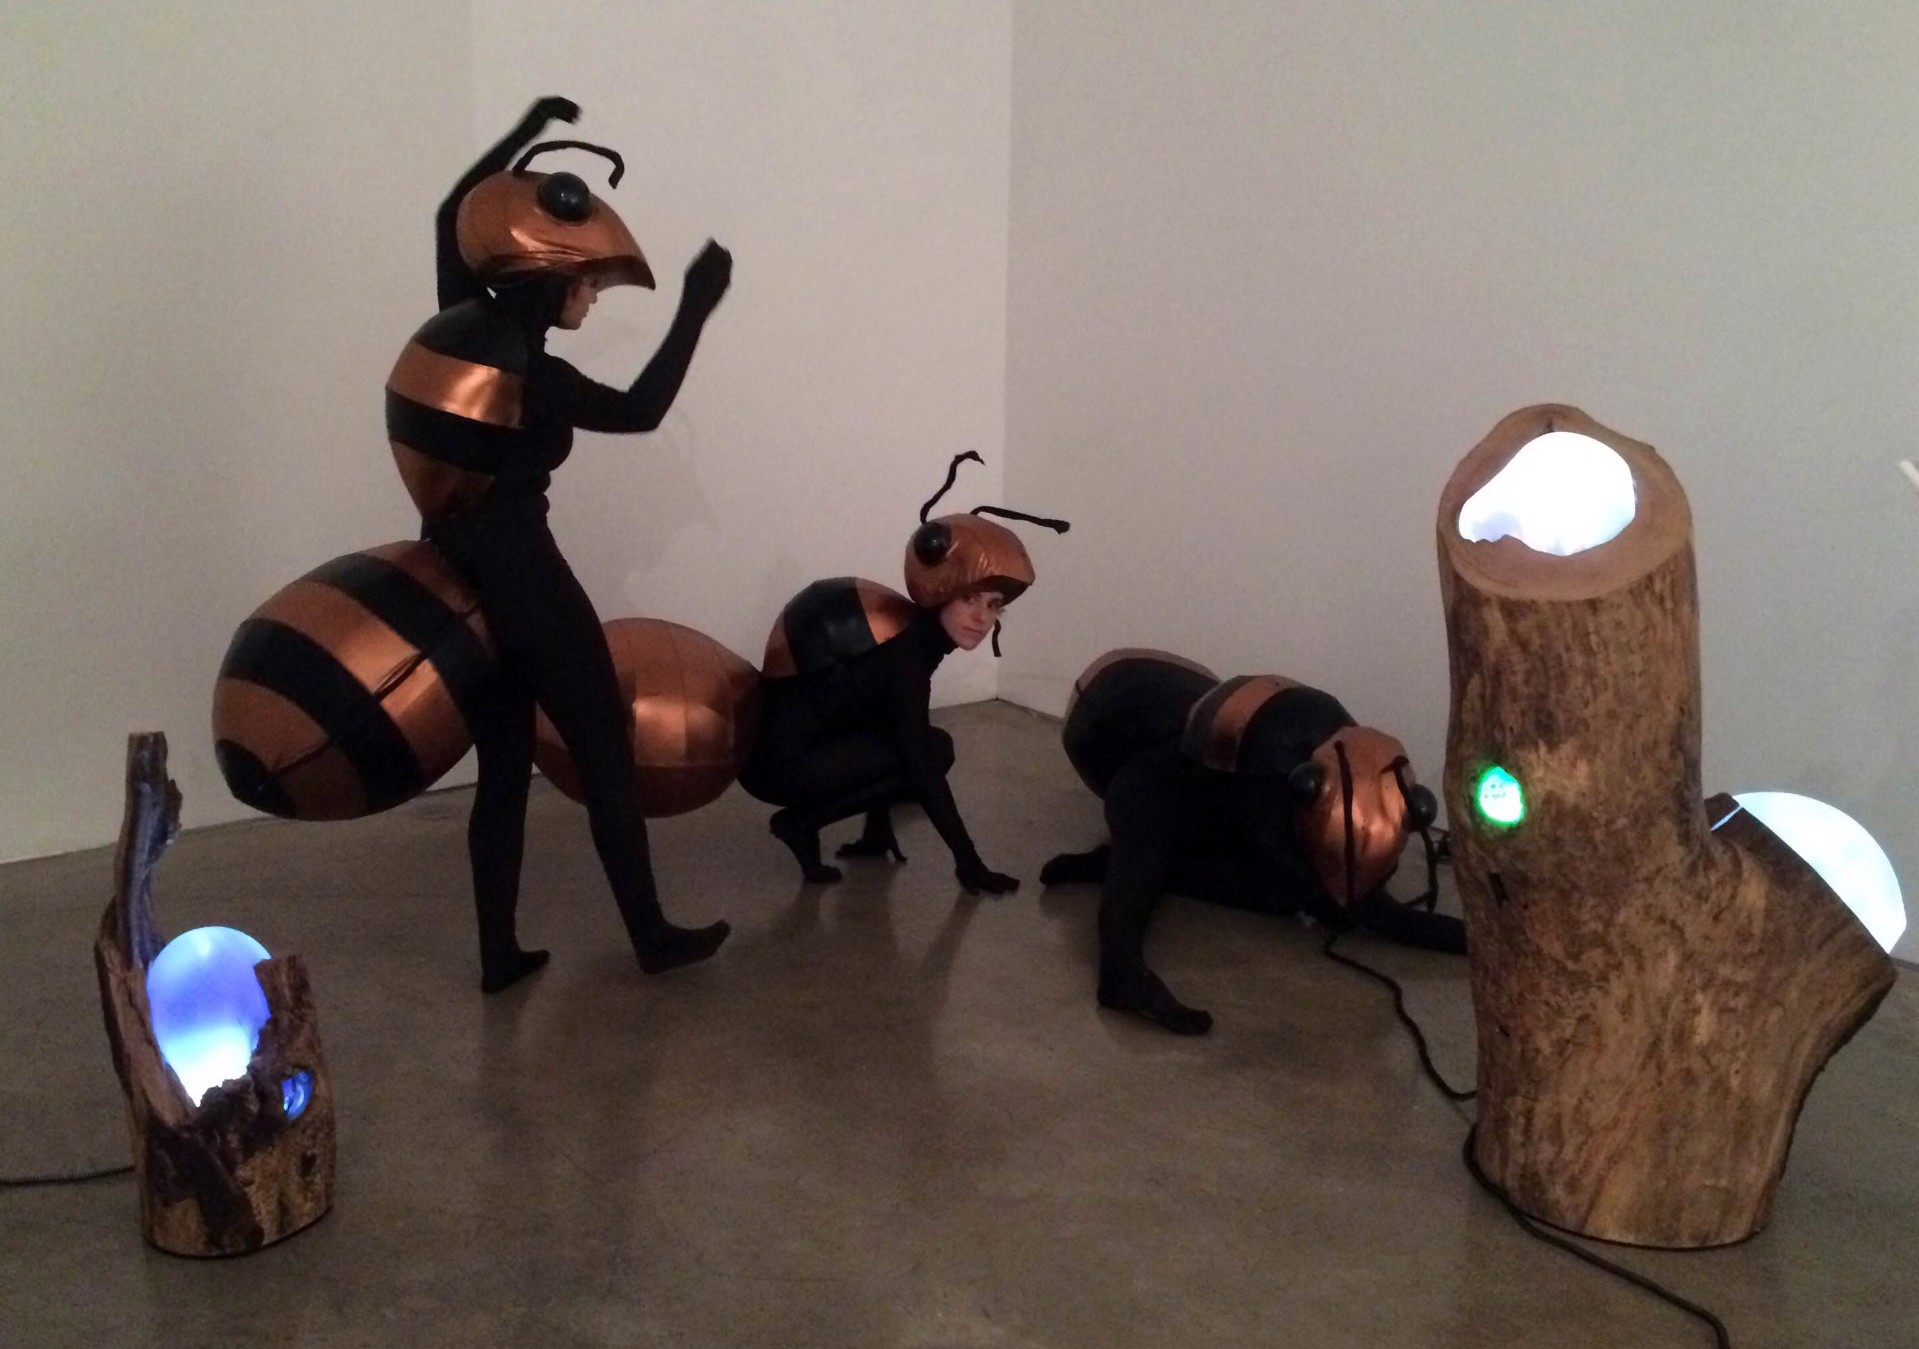 Performance (Ants): Where Does Time Begin? by Katja Loher